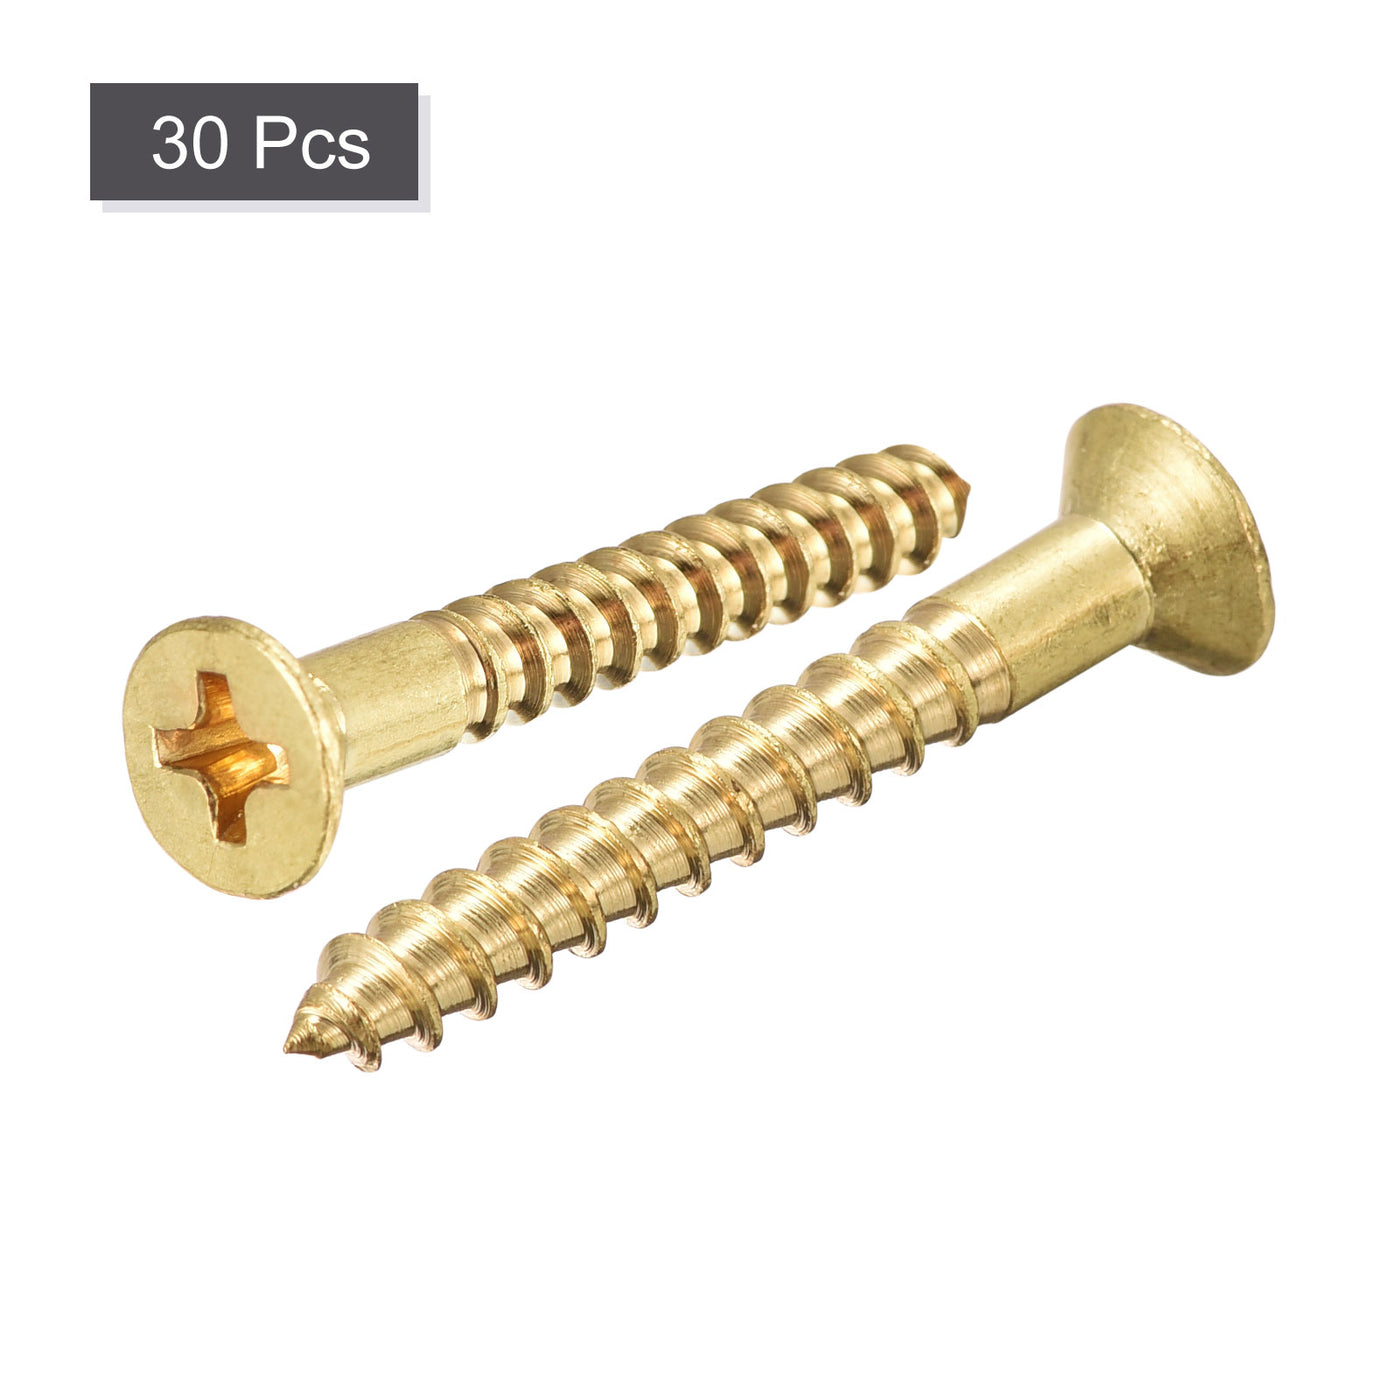 Uxcell Uxcell Brass Wood Screws, M4x30mm Phillips Flat Head Self Tapping Connector for Door, Cabinet, Wooden Furniture 10Pcs